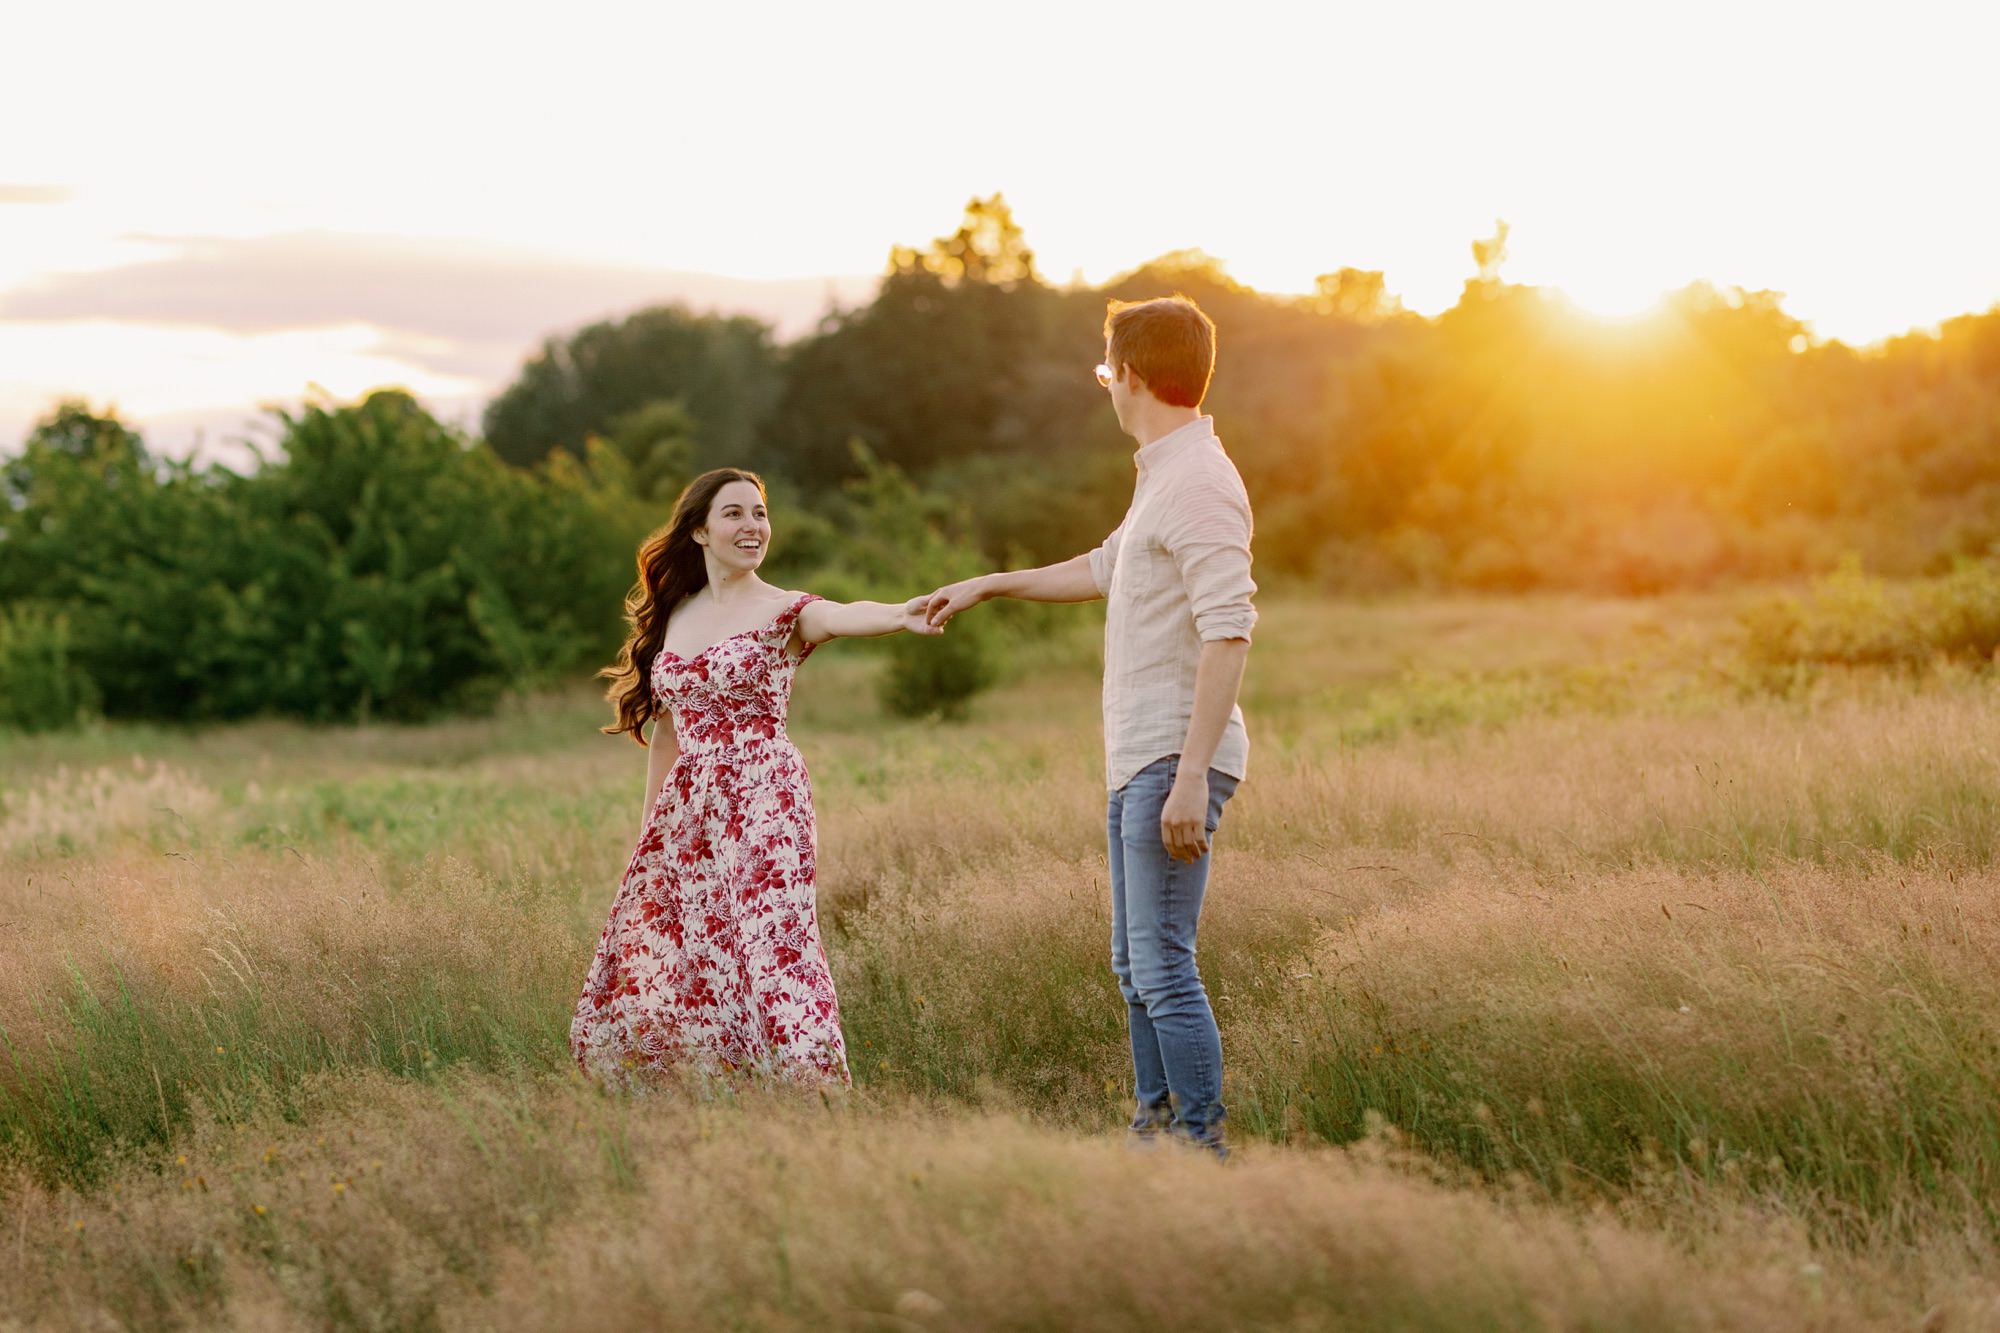 A couple holding hands and walking in a grassy field at sunset, with the woman in a floral dress and the man in a light shirt.